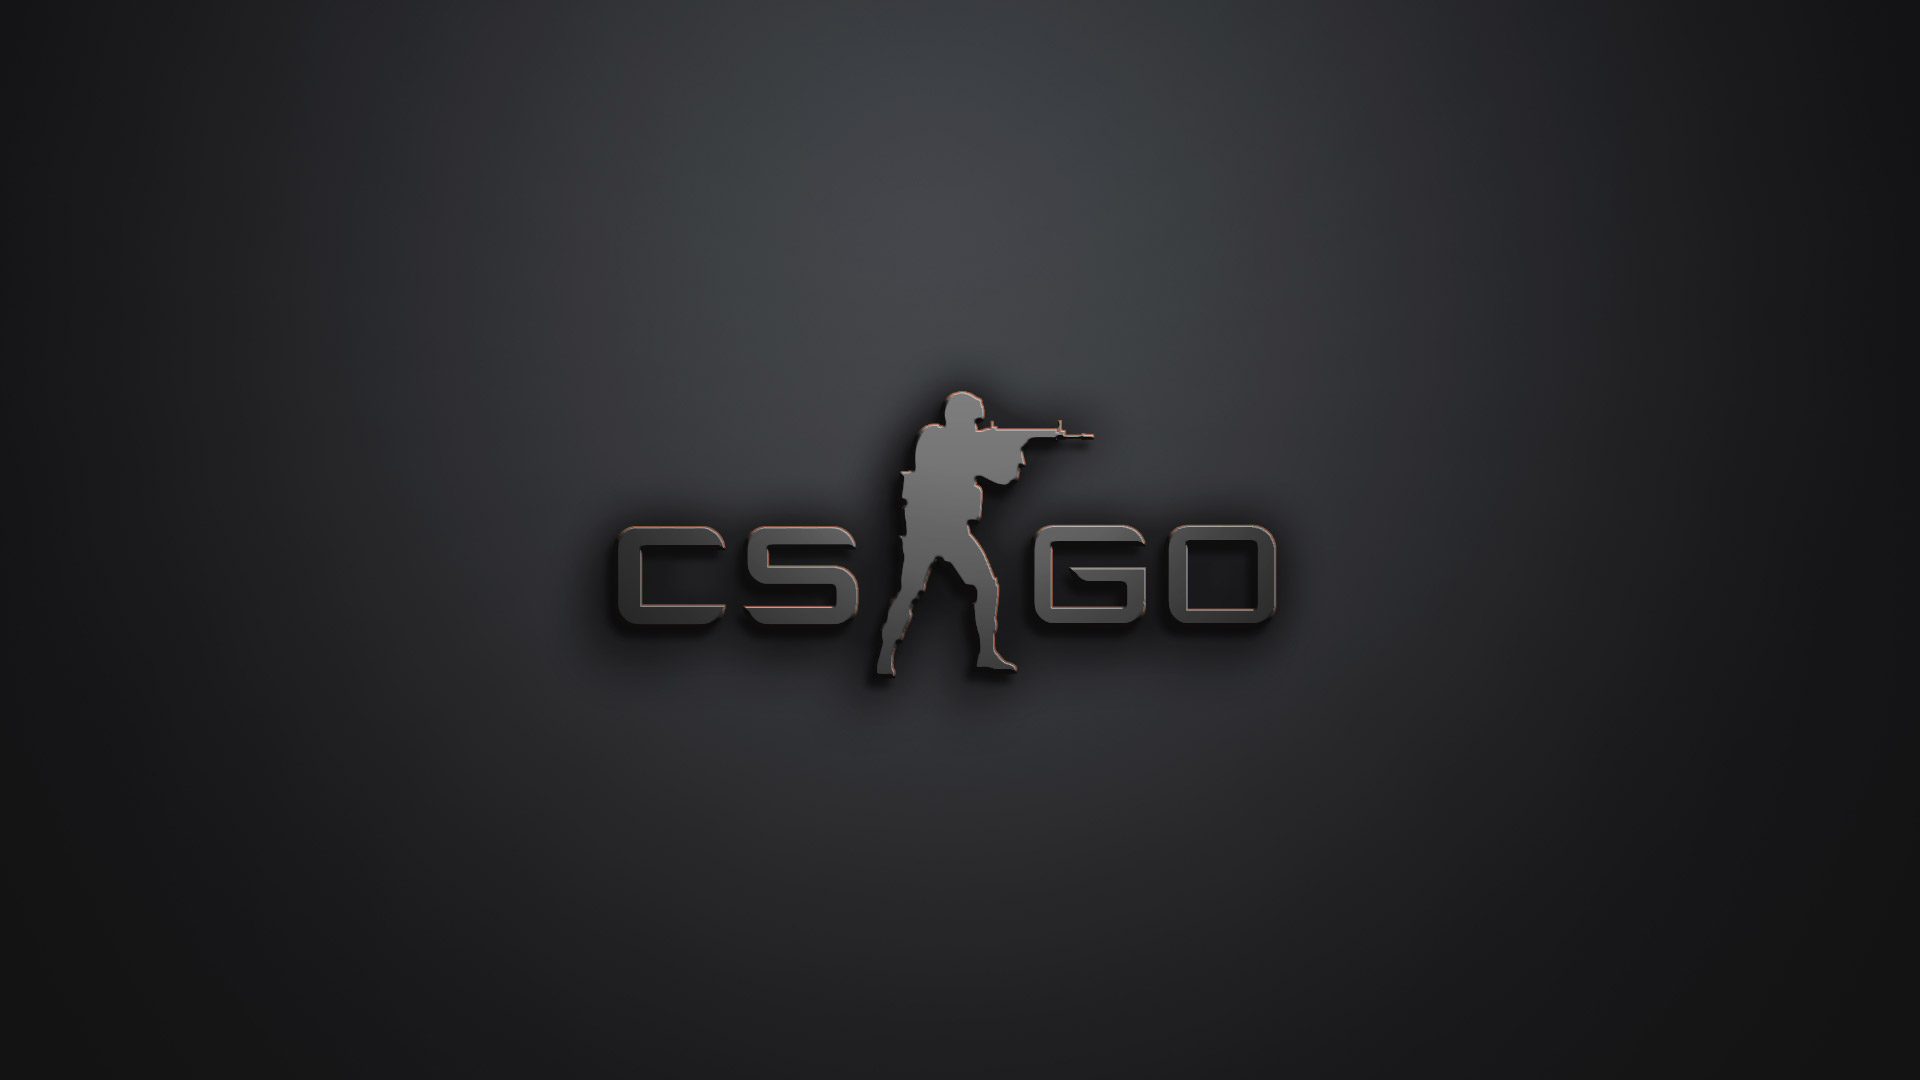 Counter Strike Wallpaper Pictures Image